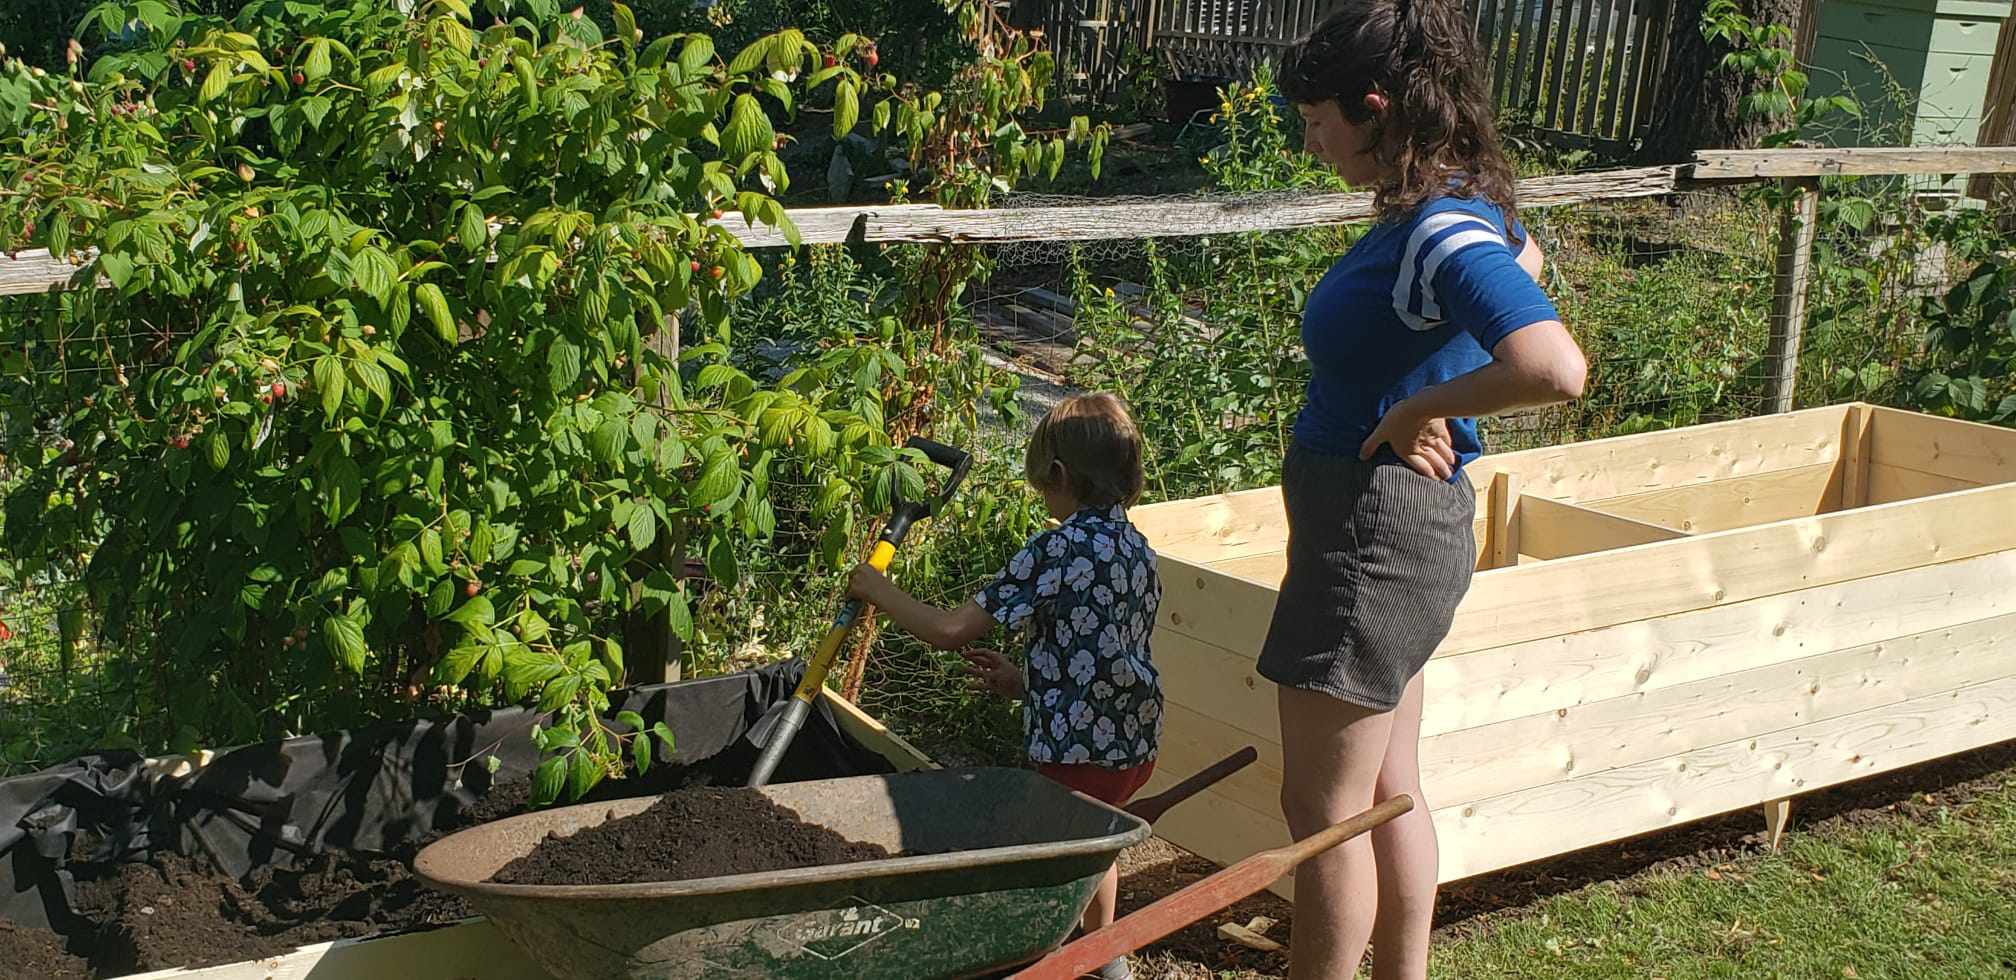 a young kindergarten aged child with a shovel being watched by an adult behind them. the child is shoveling soil into the garden beds. there are raspberrie bushes twice the childs hight around the fence and the raised beds.